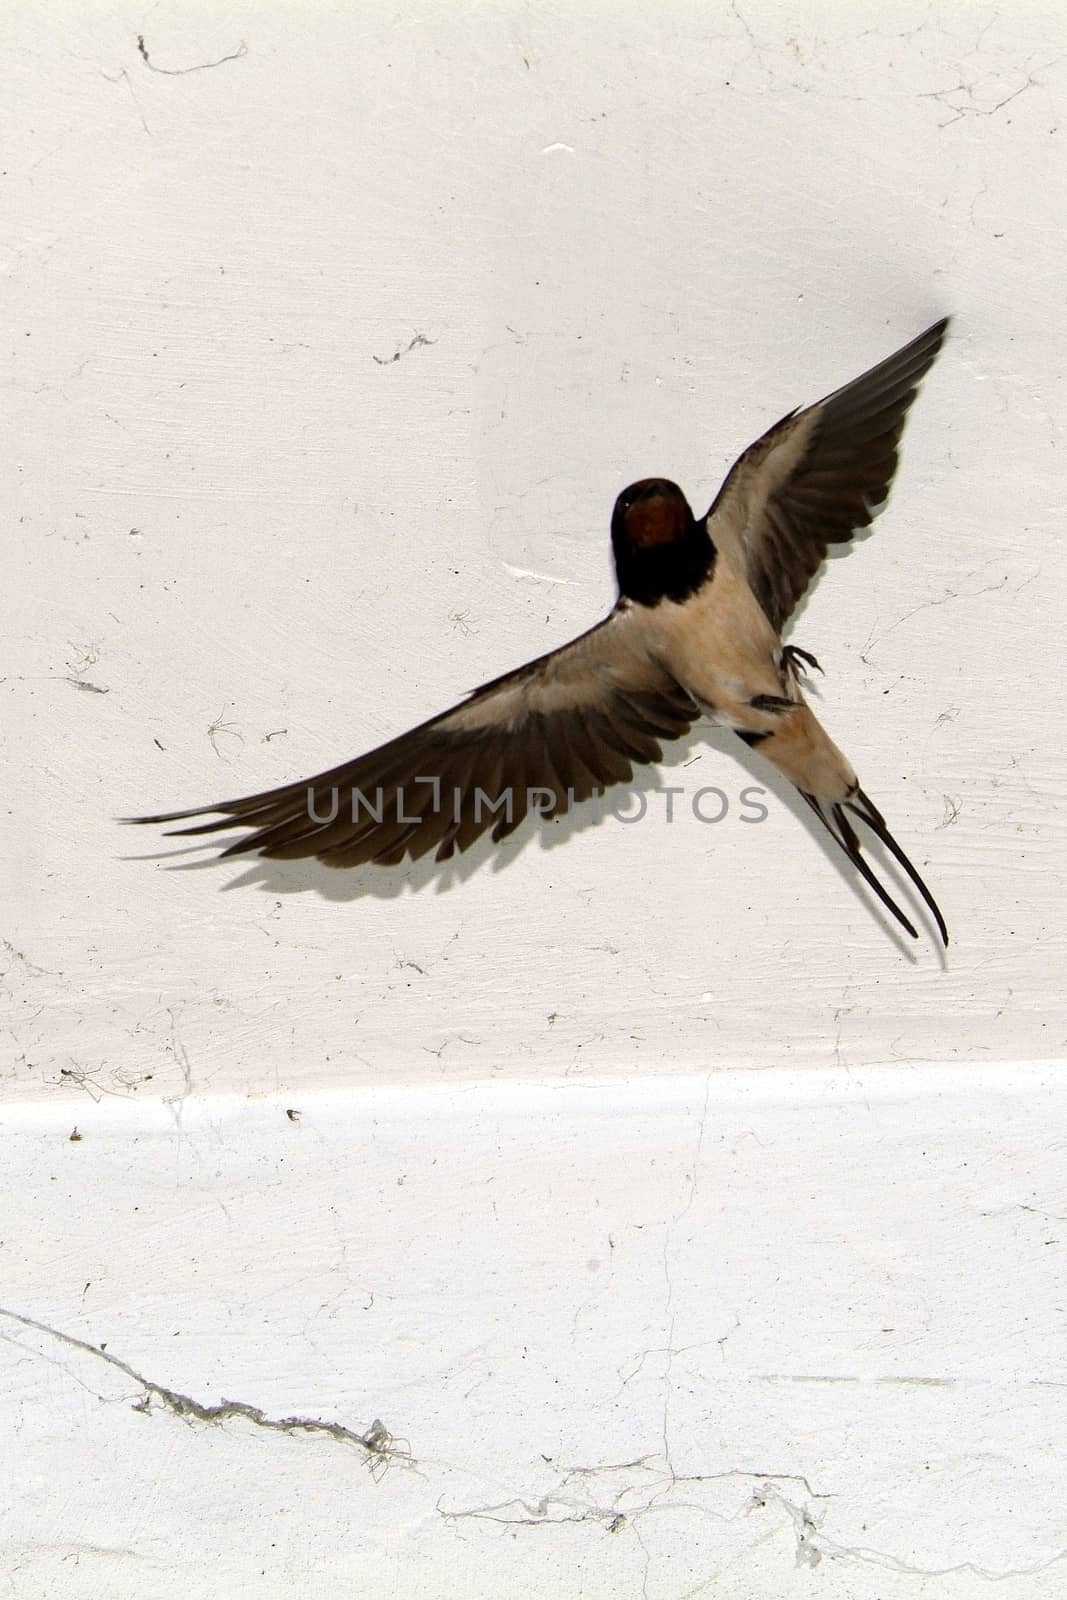 Birds and animals in wildlife. The swallow feeds the baby birds nesting, in a car box.